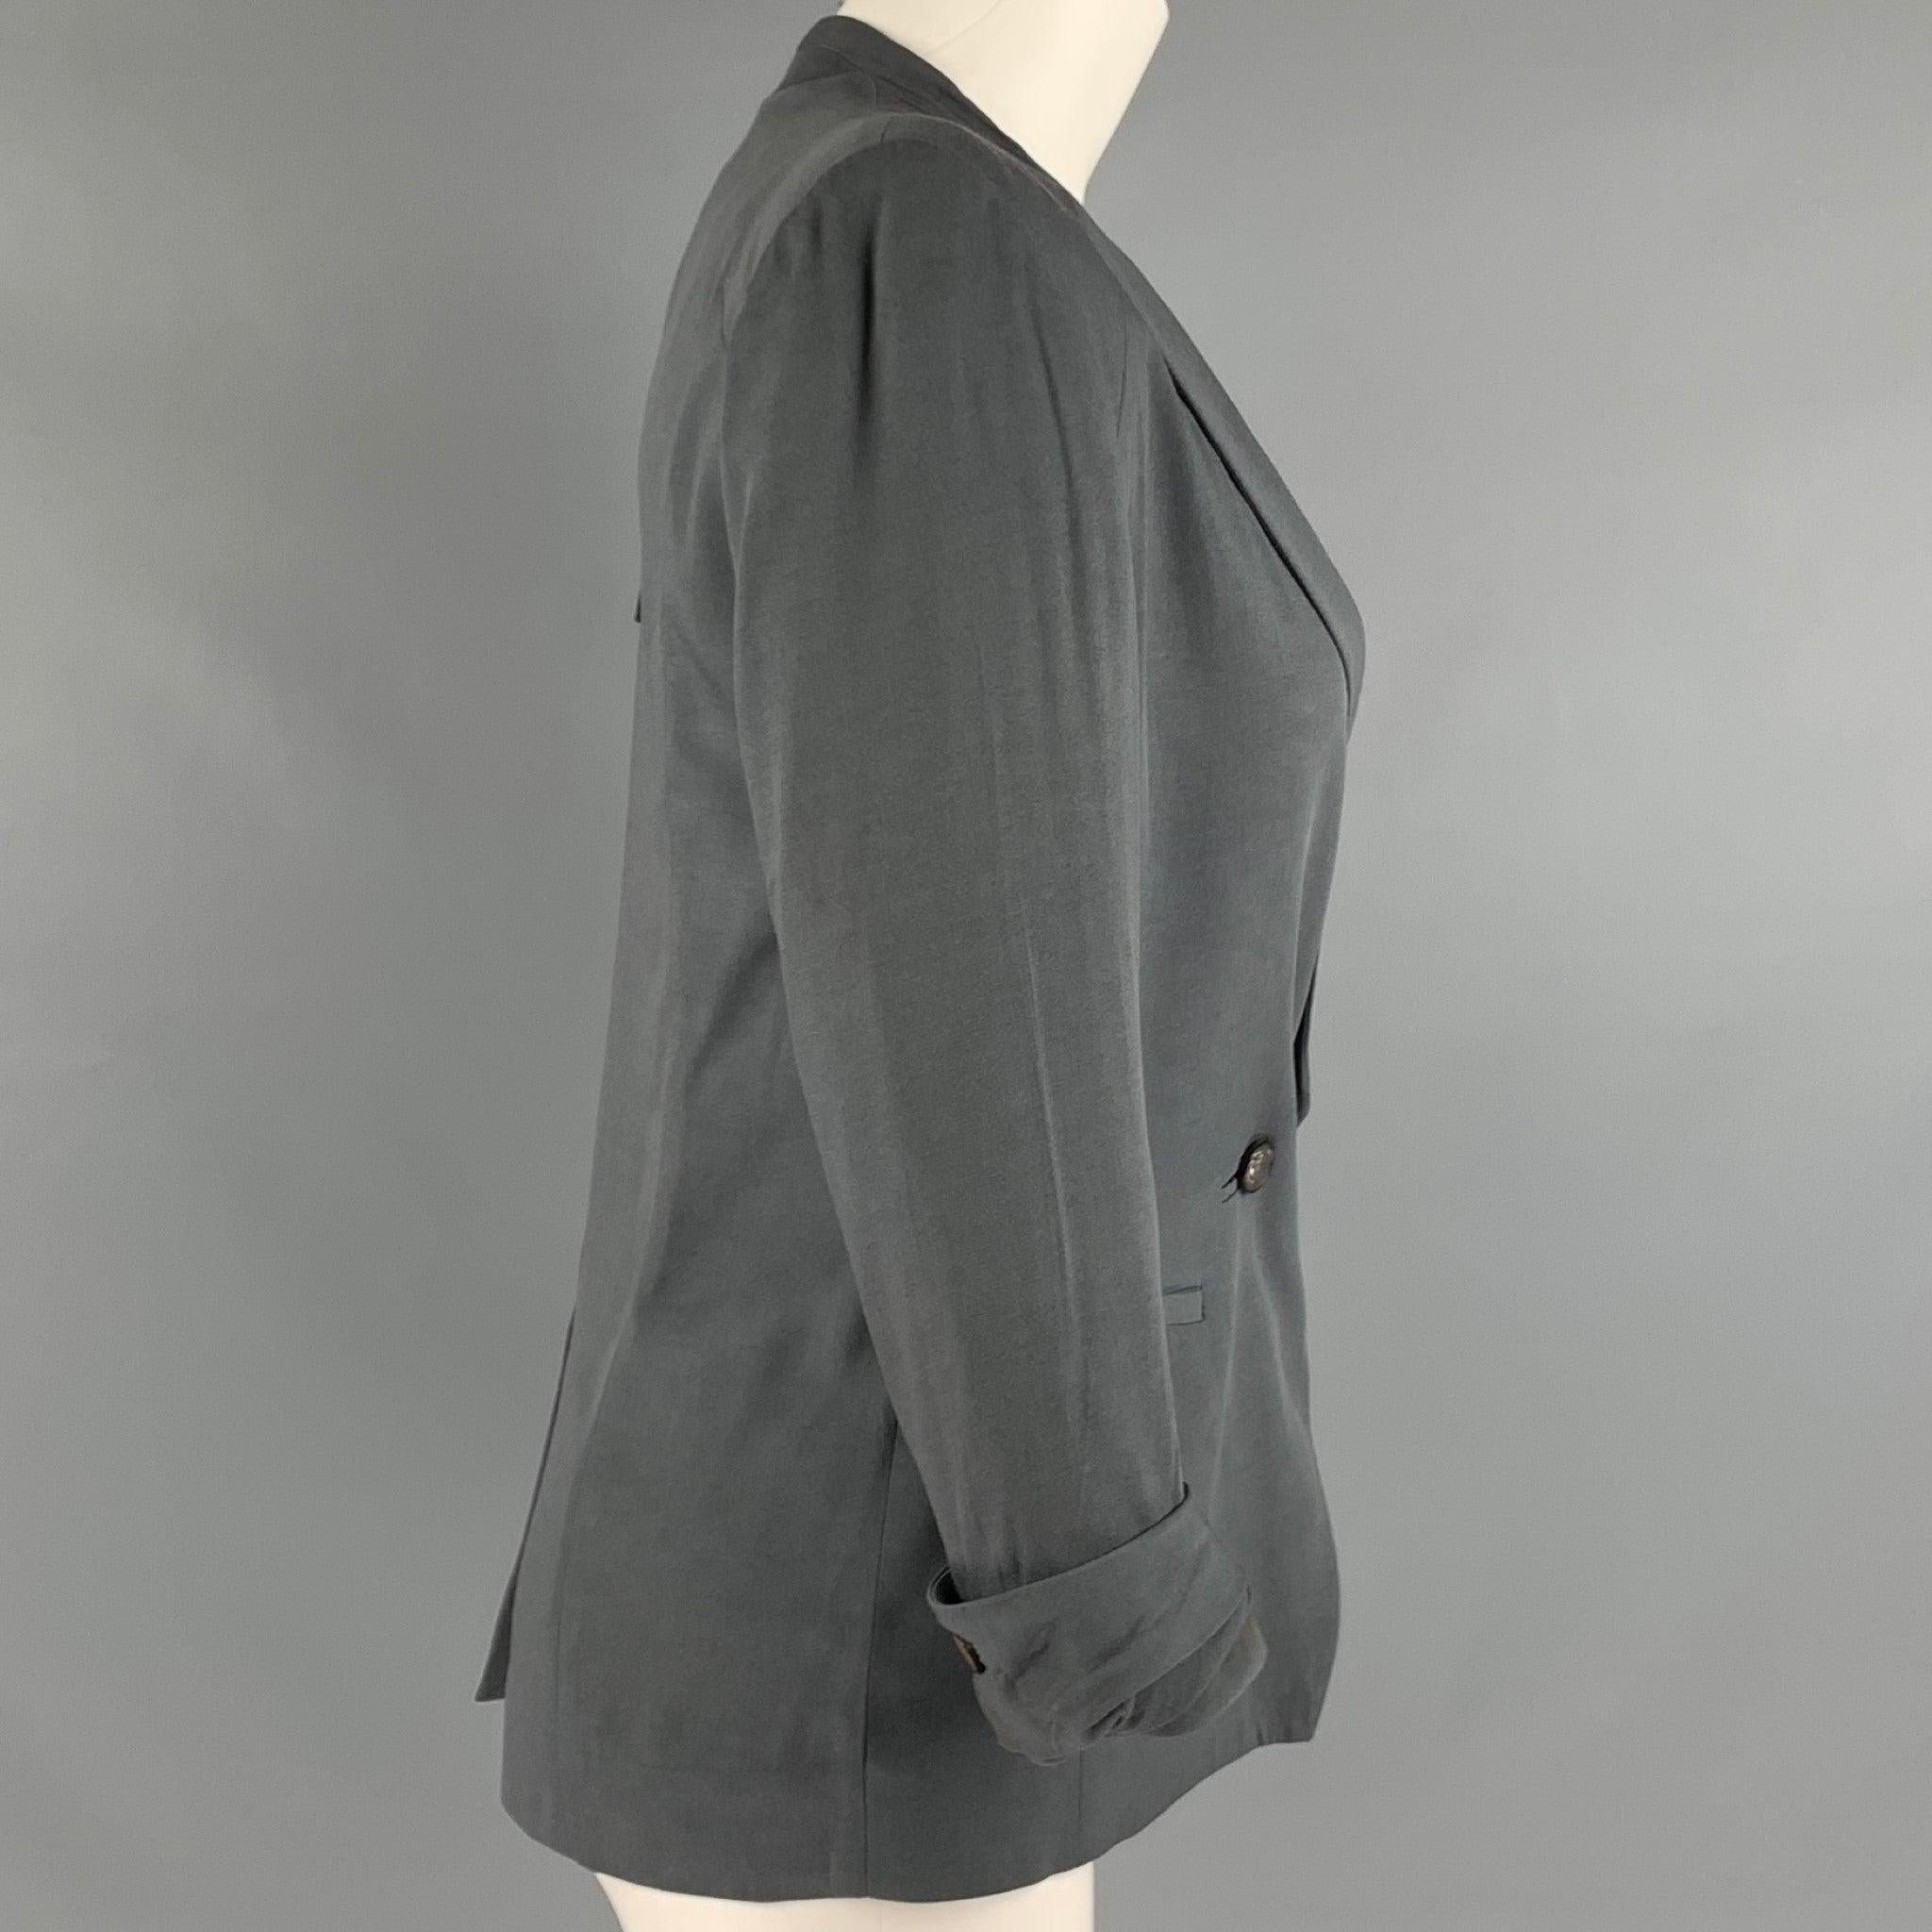 HELMUT LANG
jacket in a grey viscose blend fabric featuring a double breasted style, zip front, padded shoulders, and a two button closure. As-is. Made in USA.Good Pre-Owned Condition. Moderate signs of wear. 

Marked:   2 

Measurements: 
